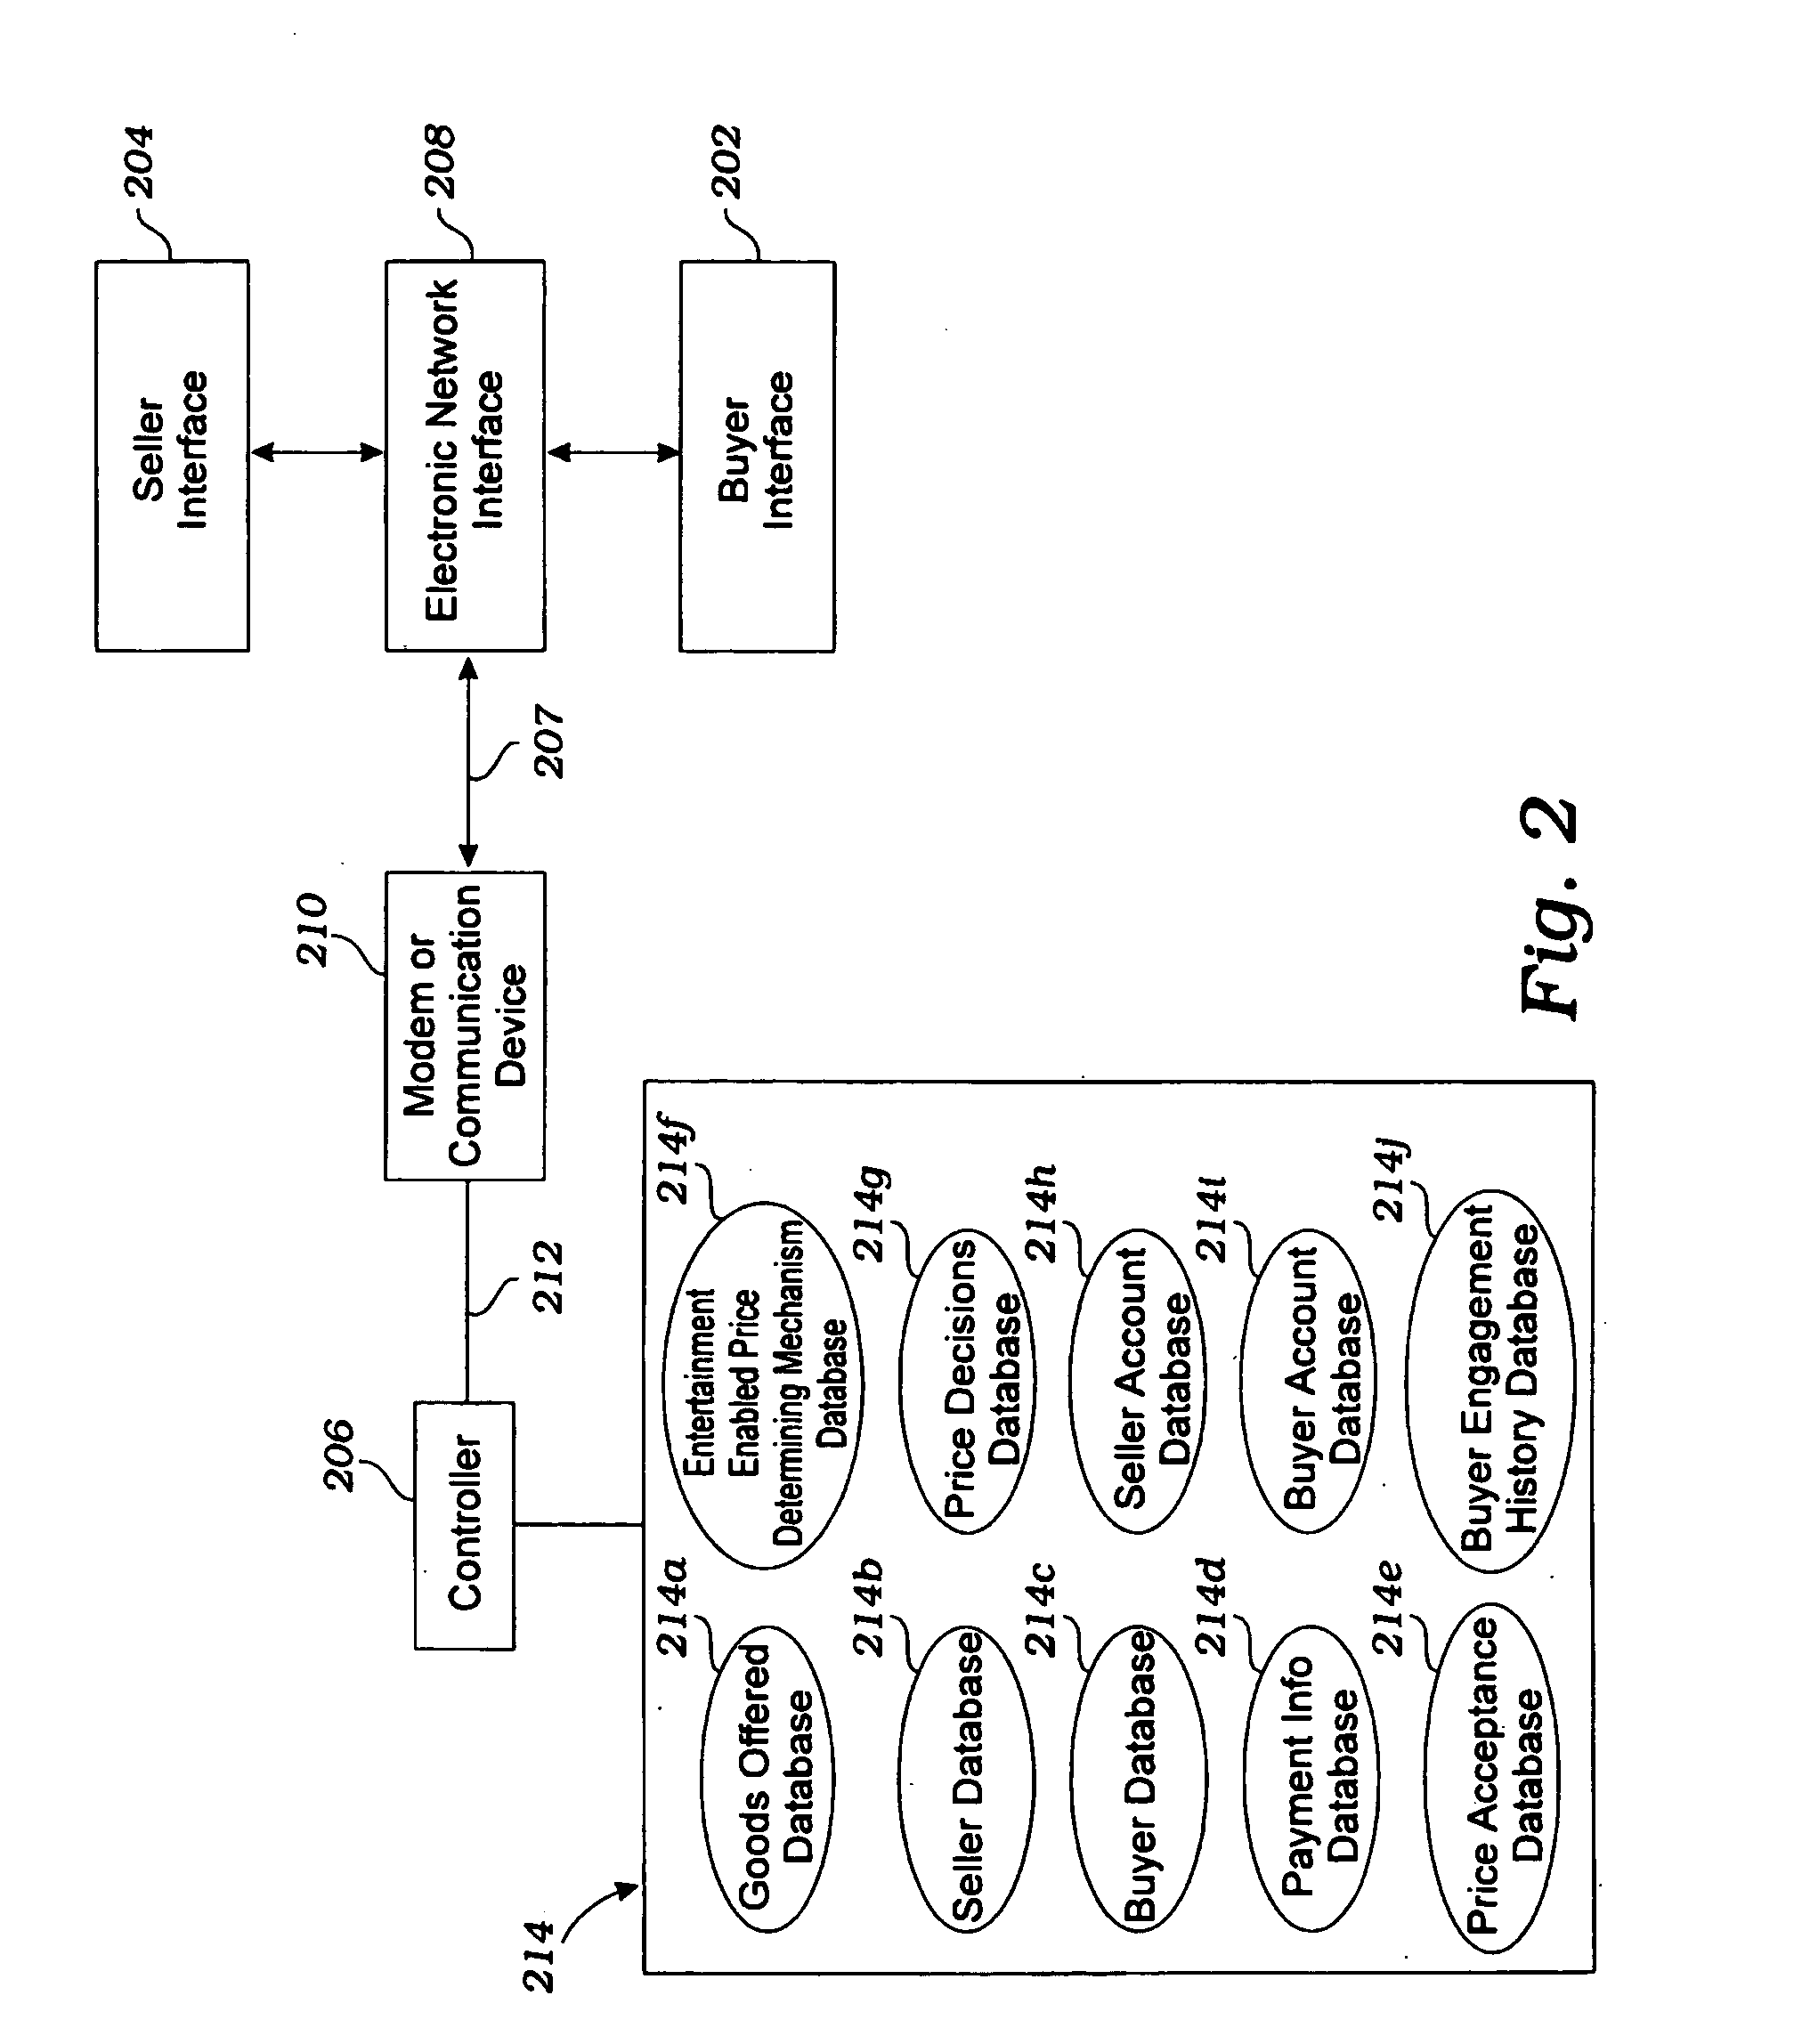 Systems and methods for transacting business over a global communications network such as the internet